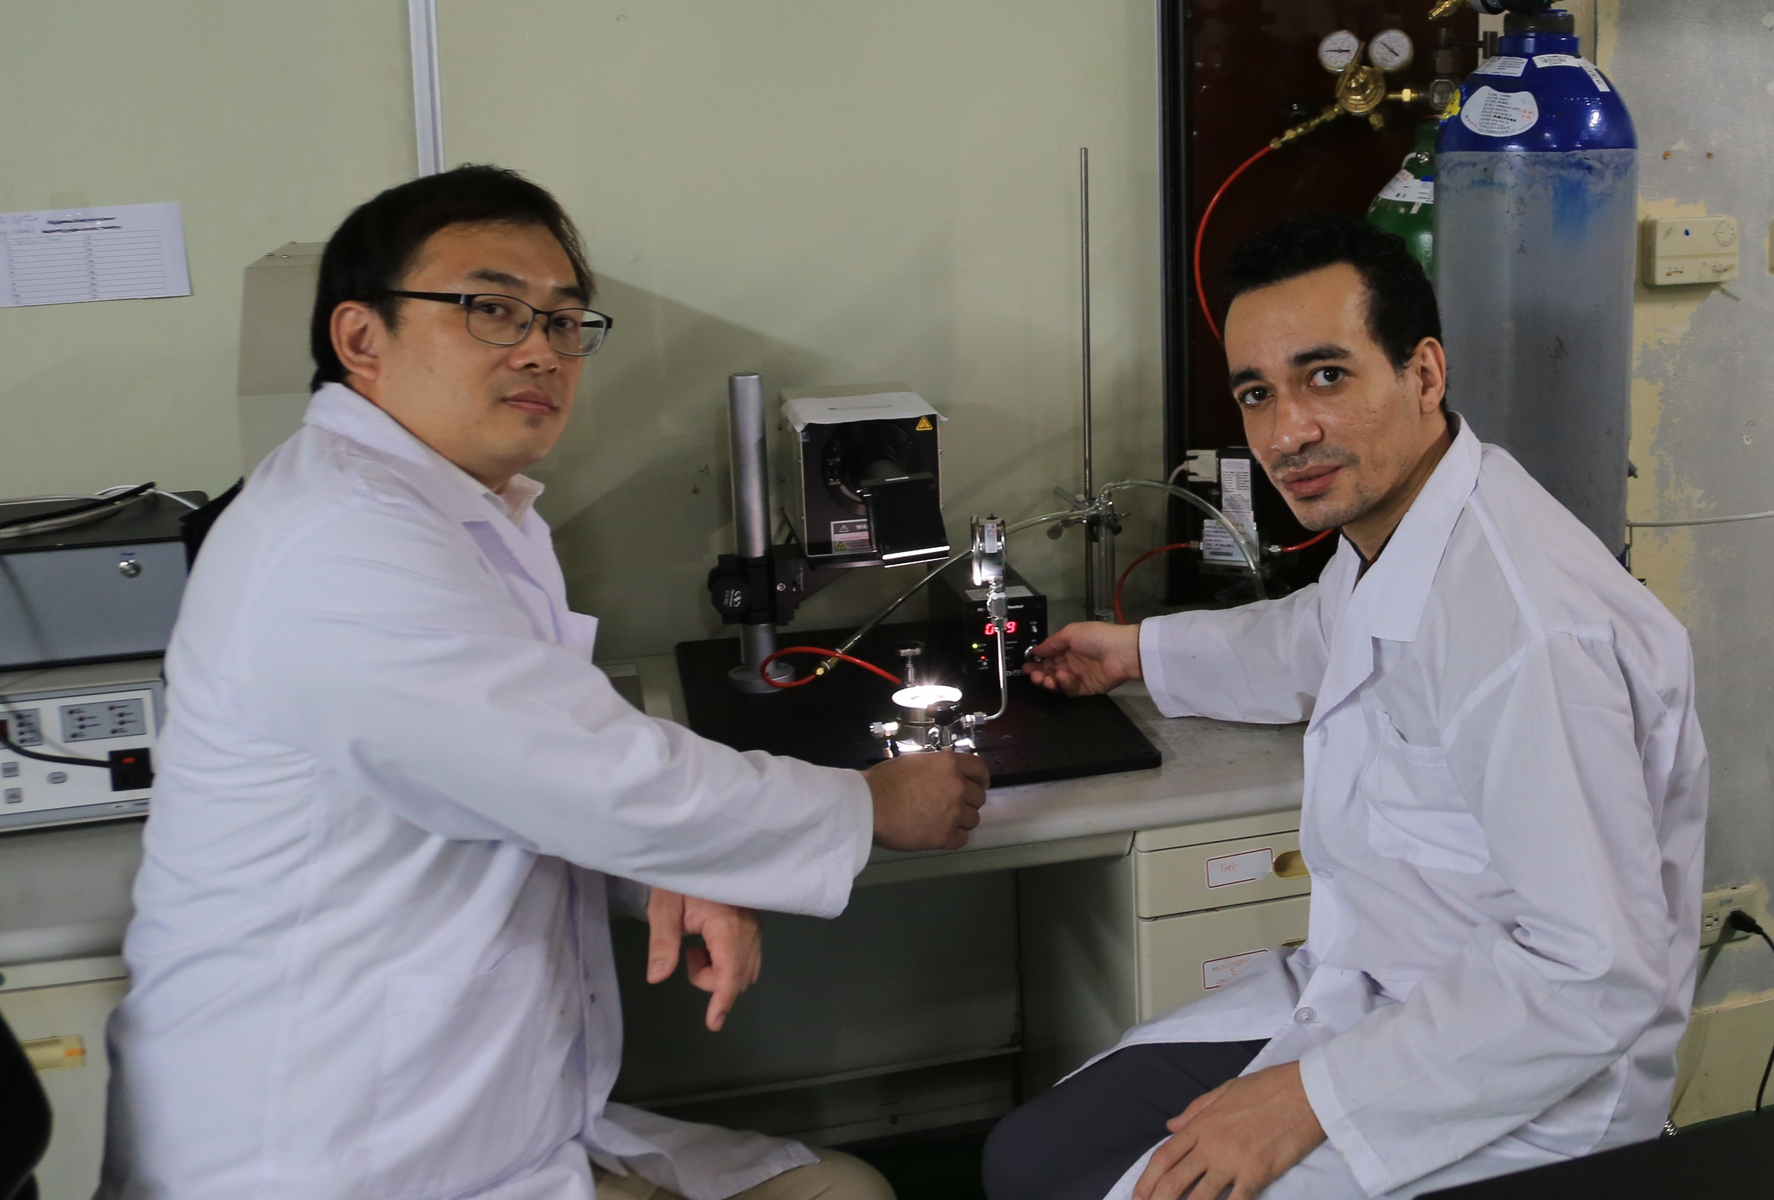 Professor Hyeonseok Lee (left) and doctoral student Hossam A. E. Omr (right)